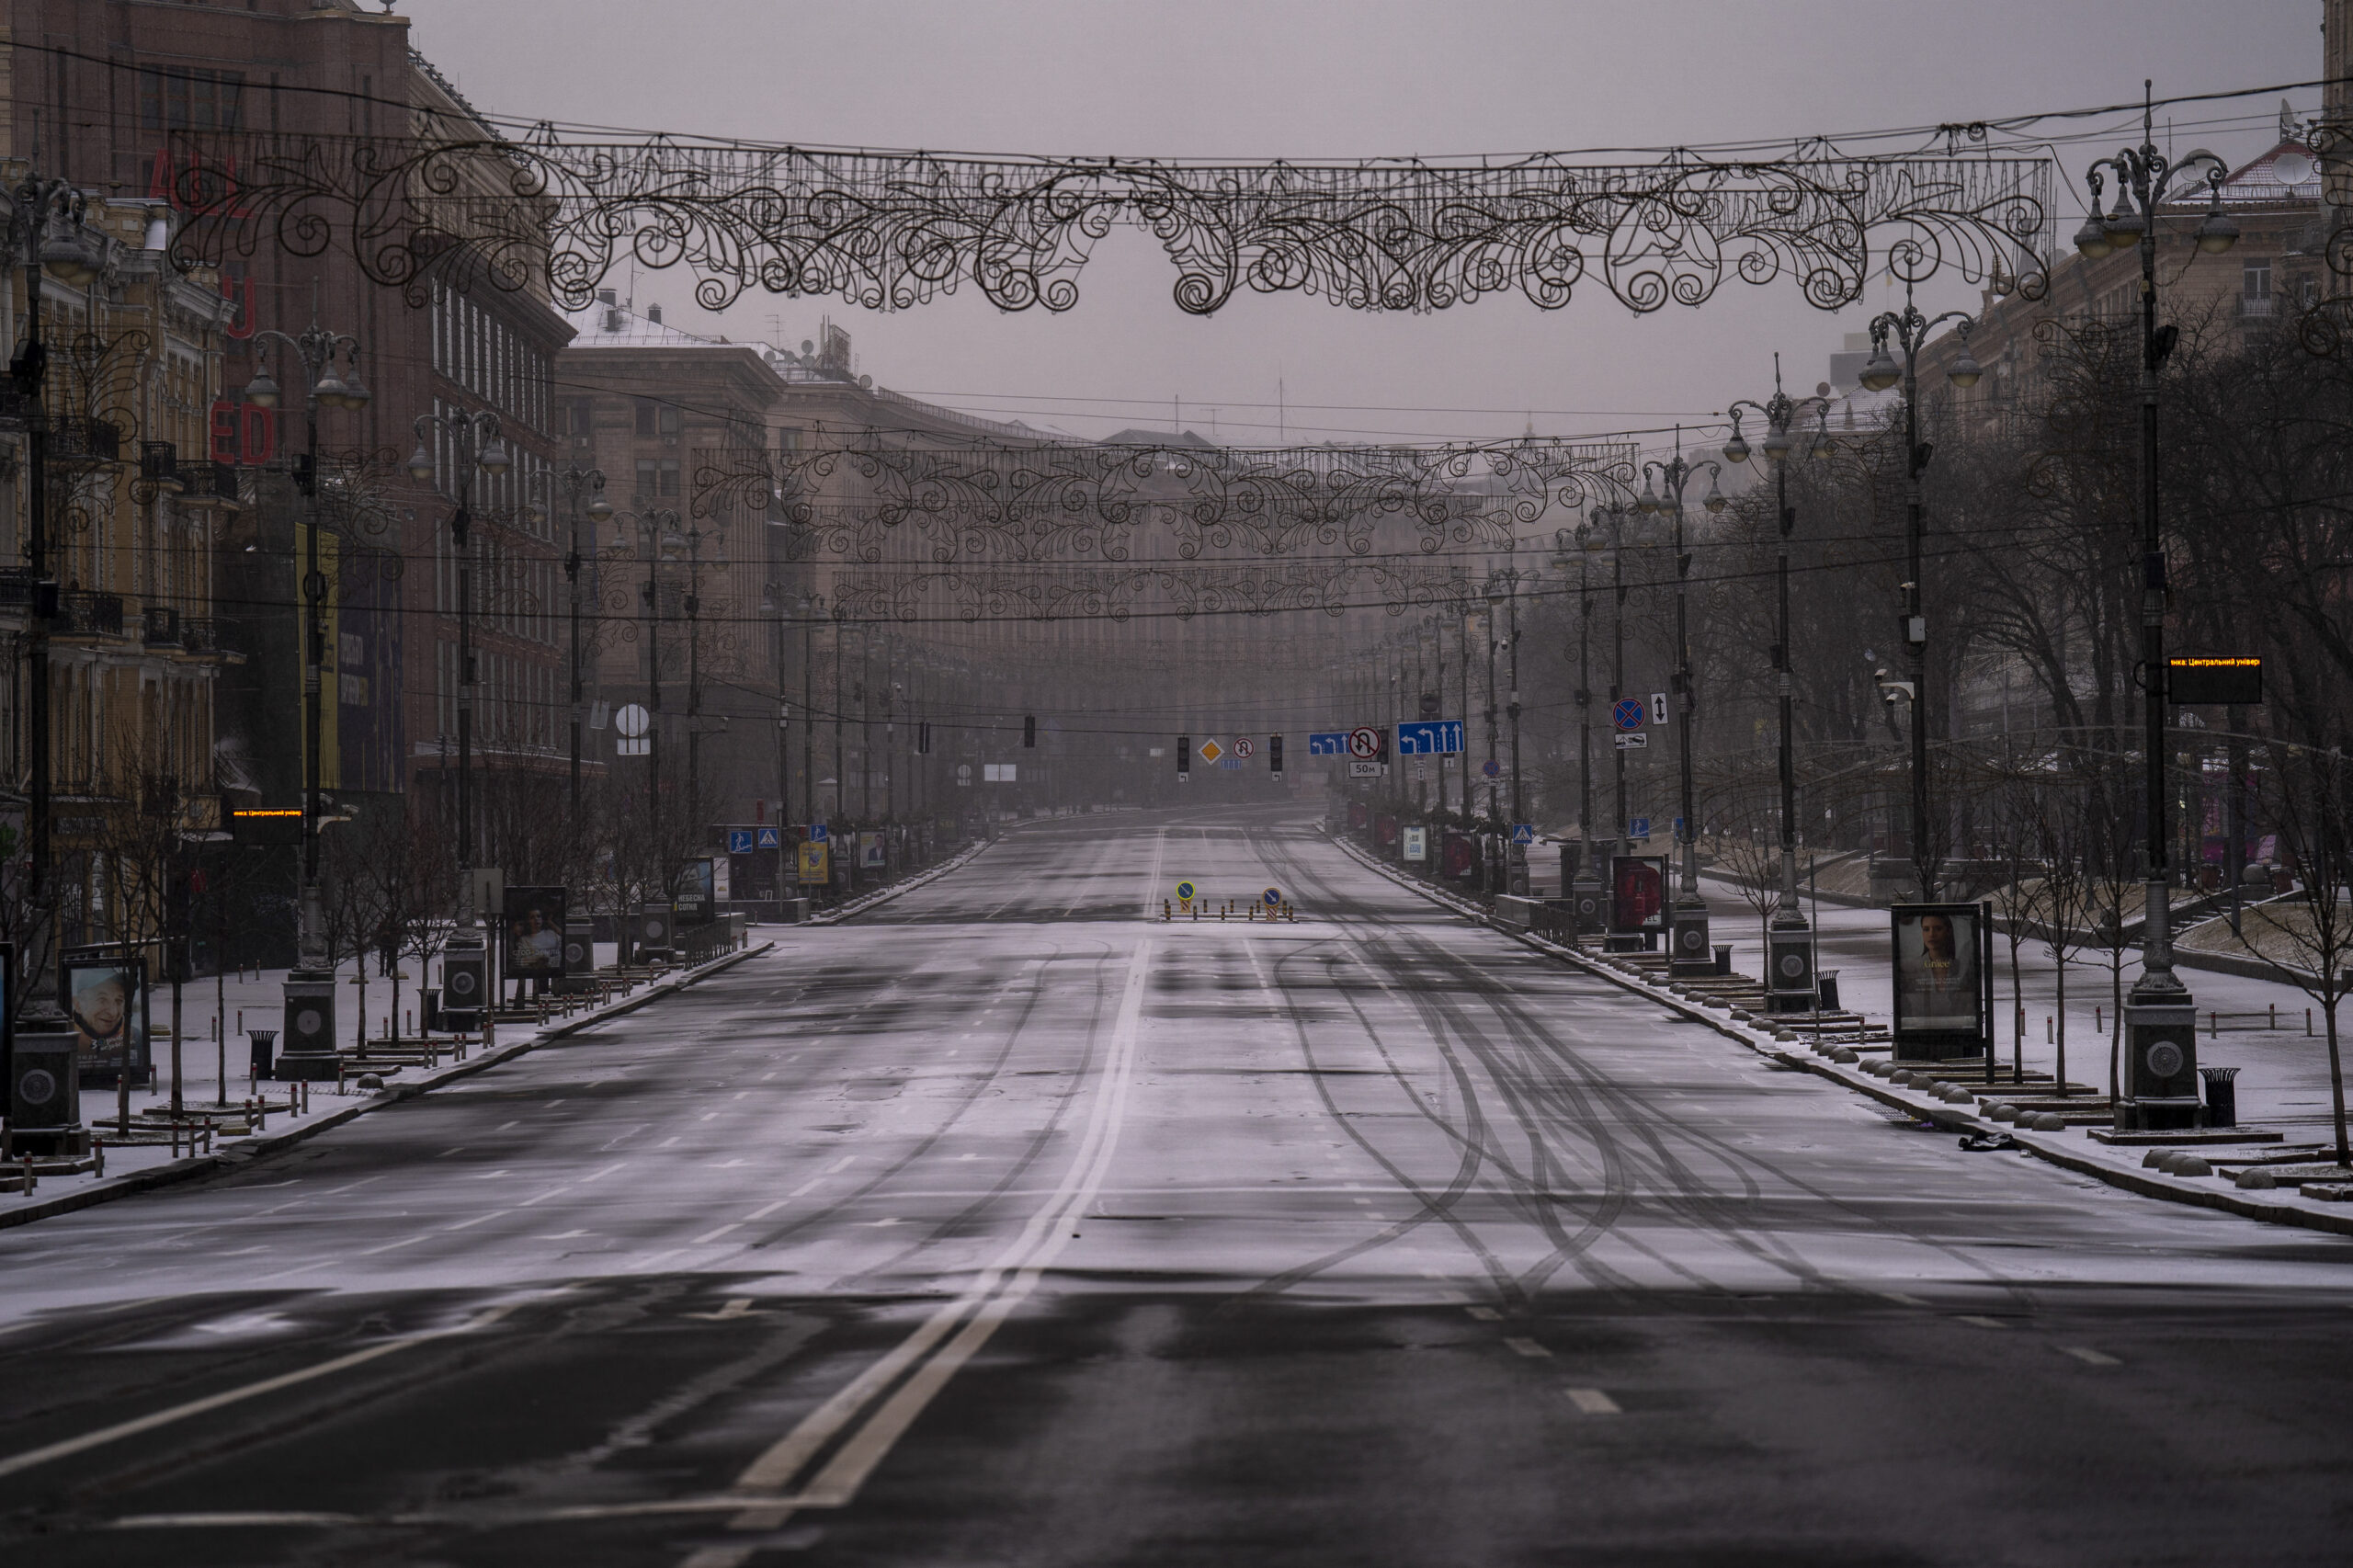 Khreshchatyk, one of the main streets in Kyiv, empty due to curfew